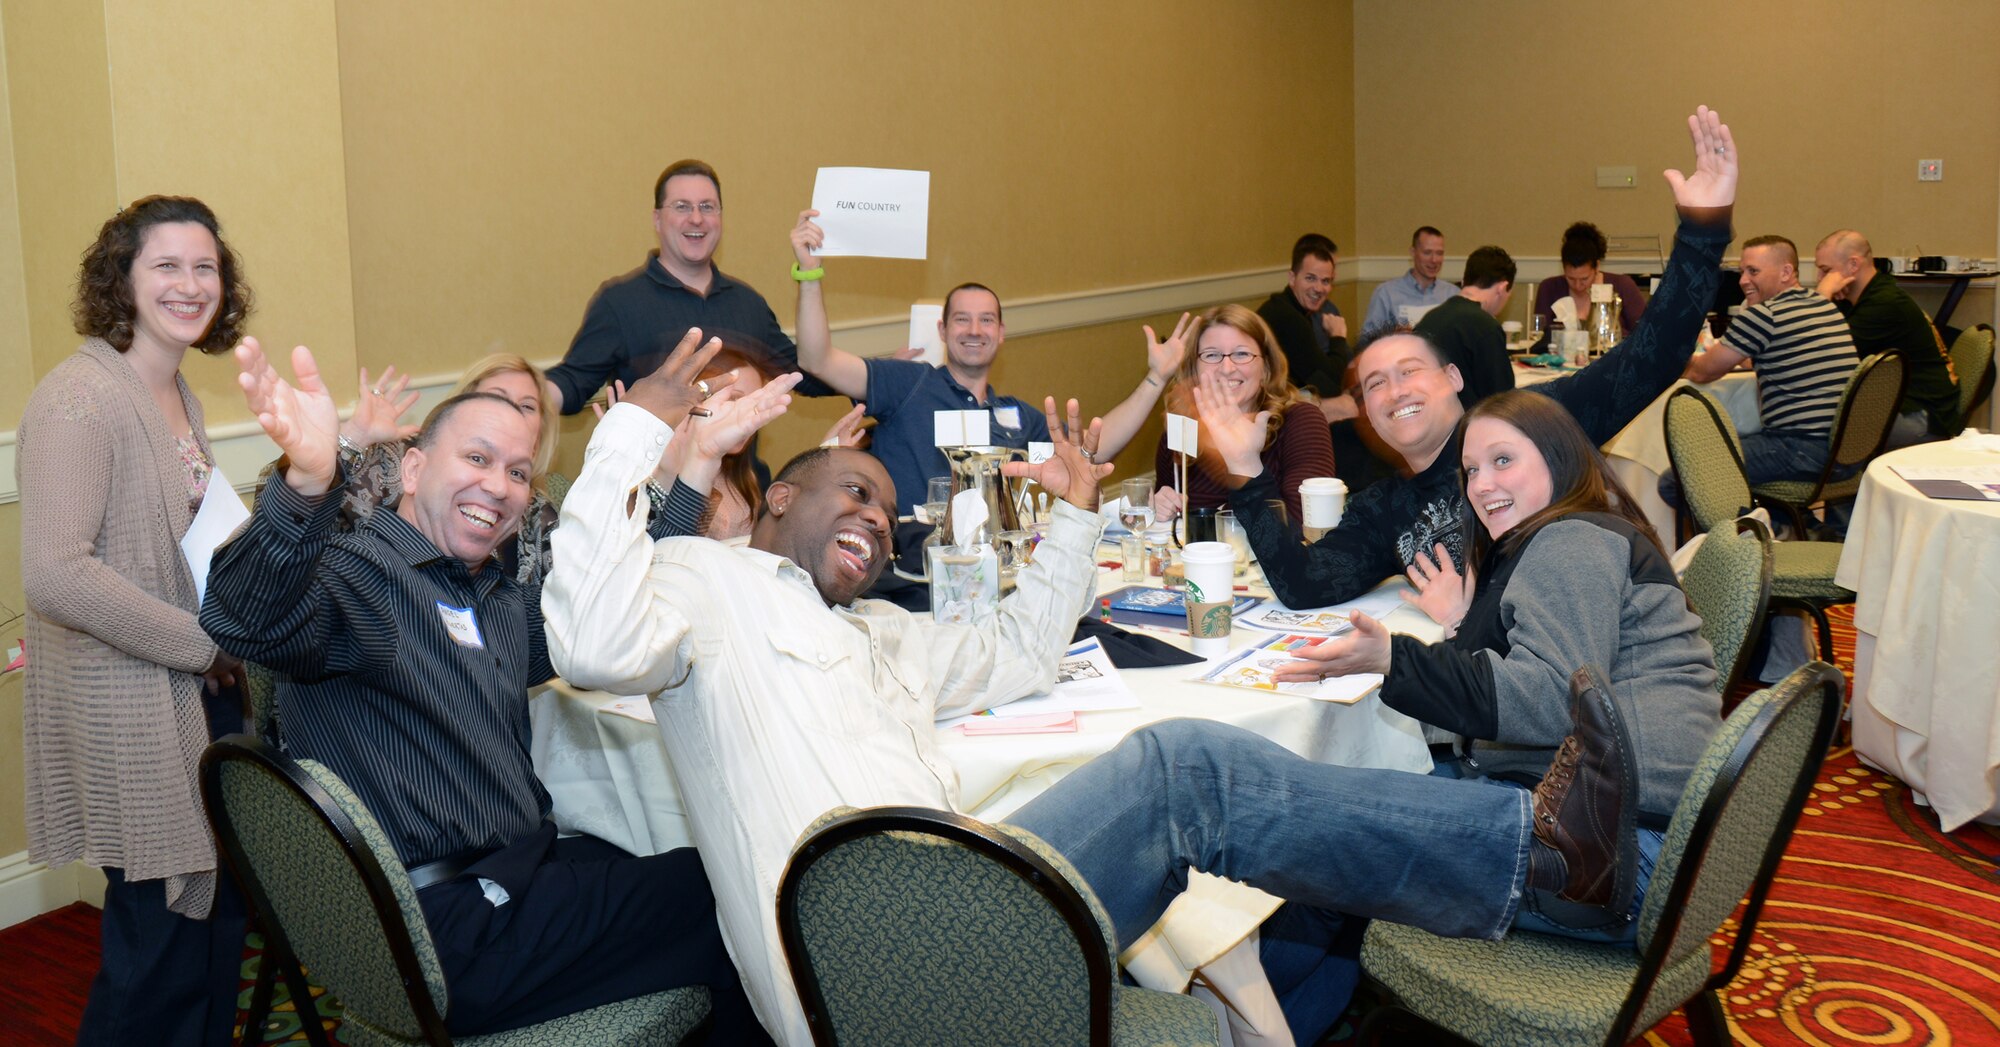 Participants of the 103rd Airlift Wing Chaplain’s office Strong Bonds event show the camera how fun they are, which was part of the personality assessments given during the event which was held at the Mystic Marriott  Hotel and Spa located in Groton, Conn., April 12, 2013. (U.S. Air National Guard photo by Senior Airman Jennifer Pierce/Released)